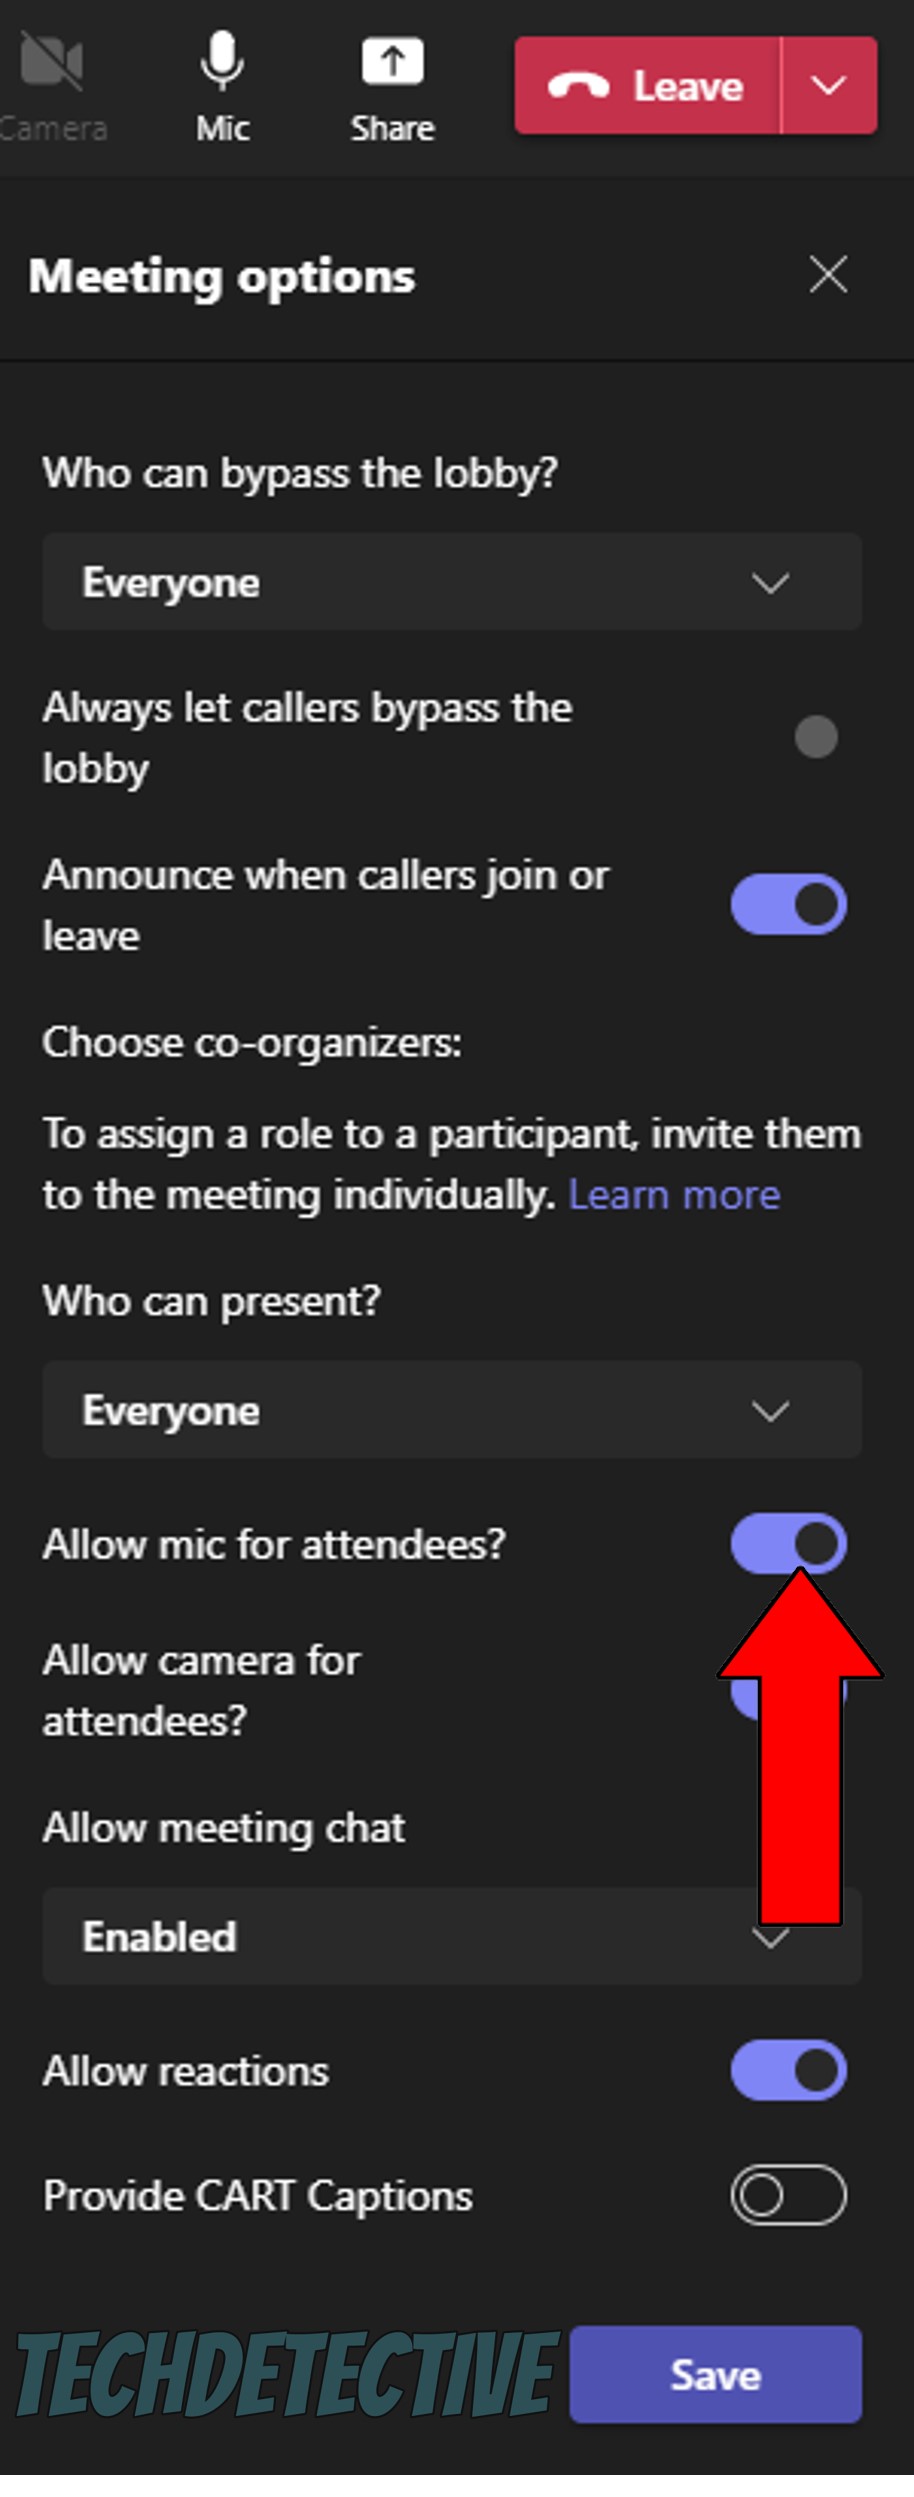 How to disable mic for all attendees in Microsoft Teams